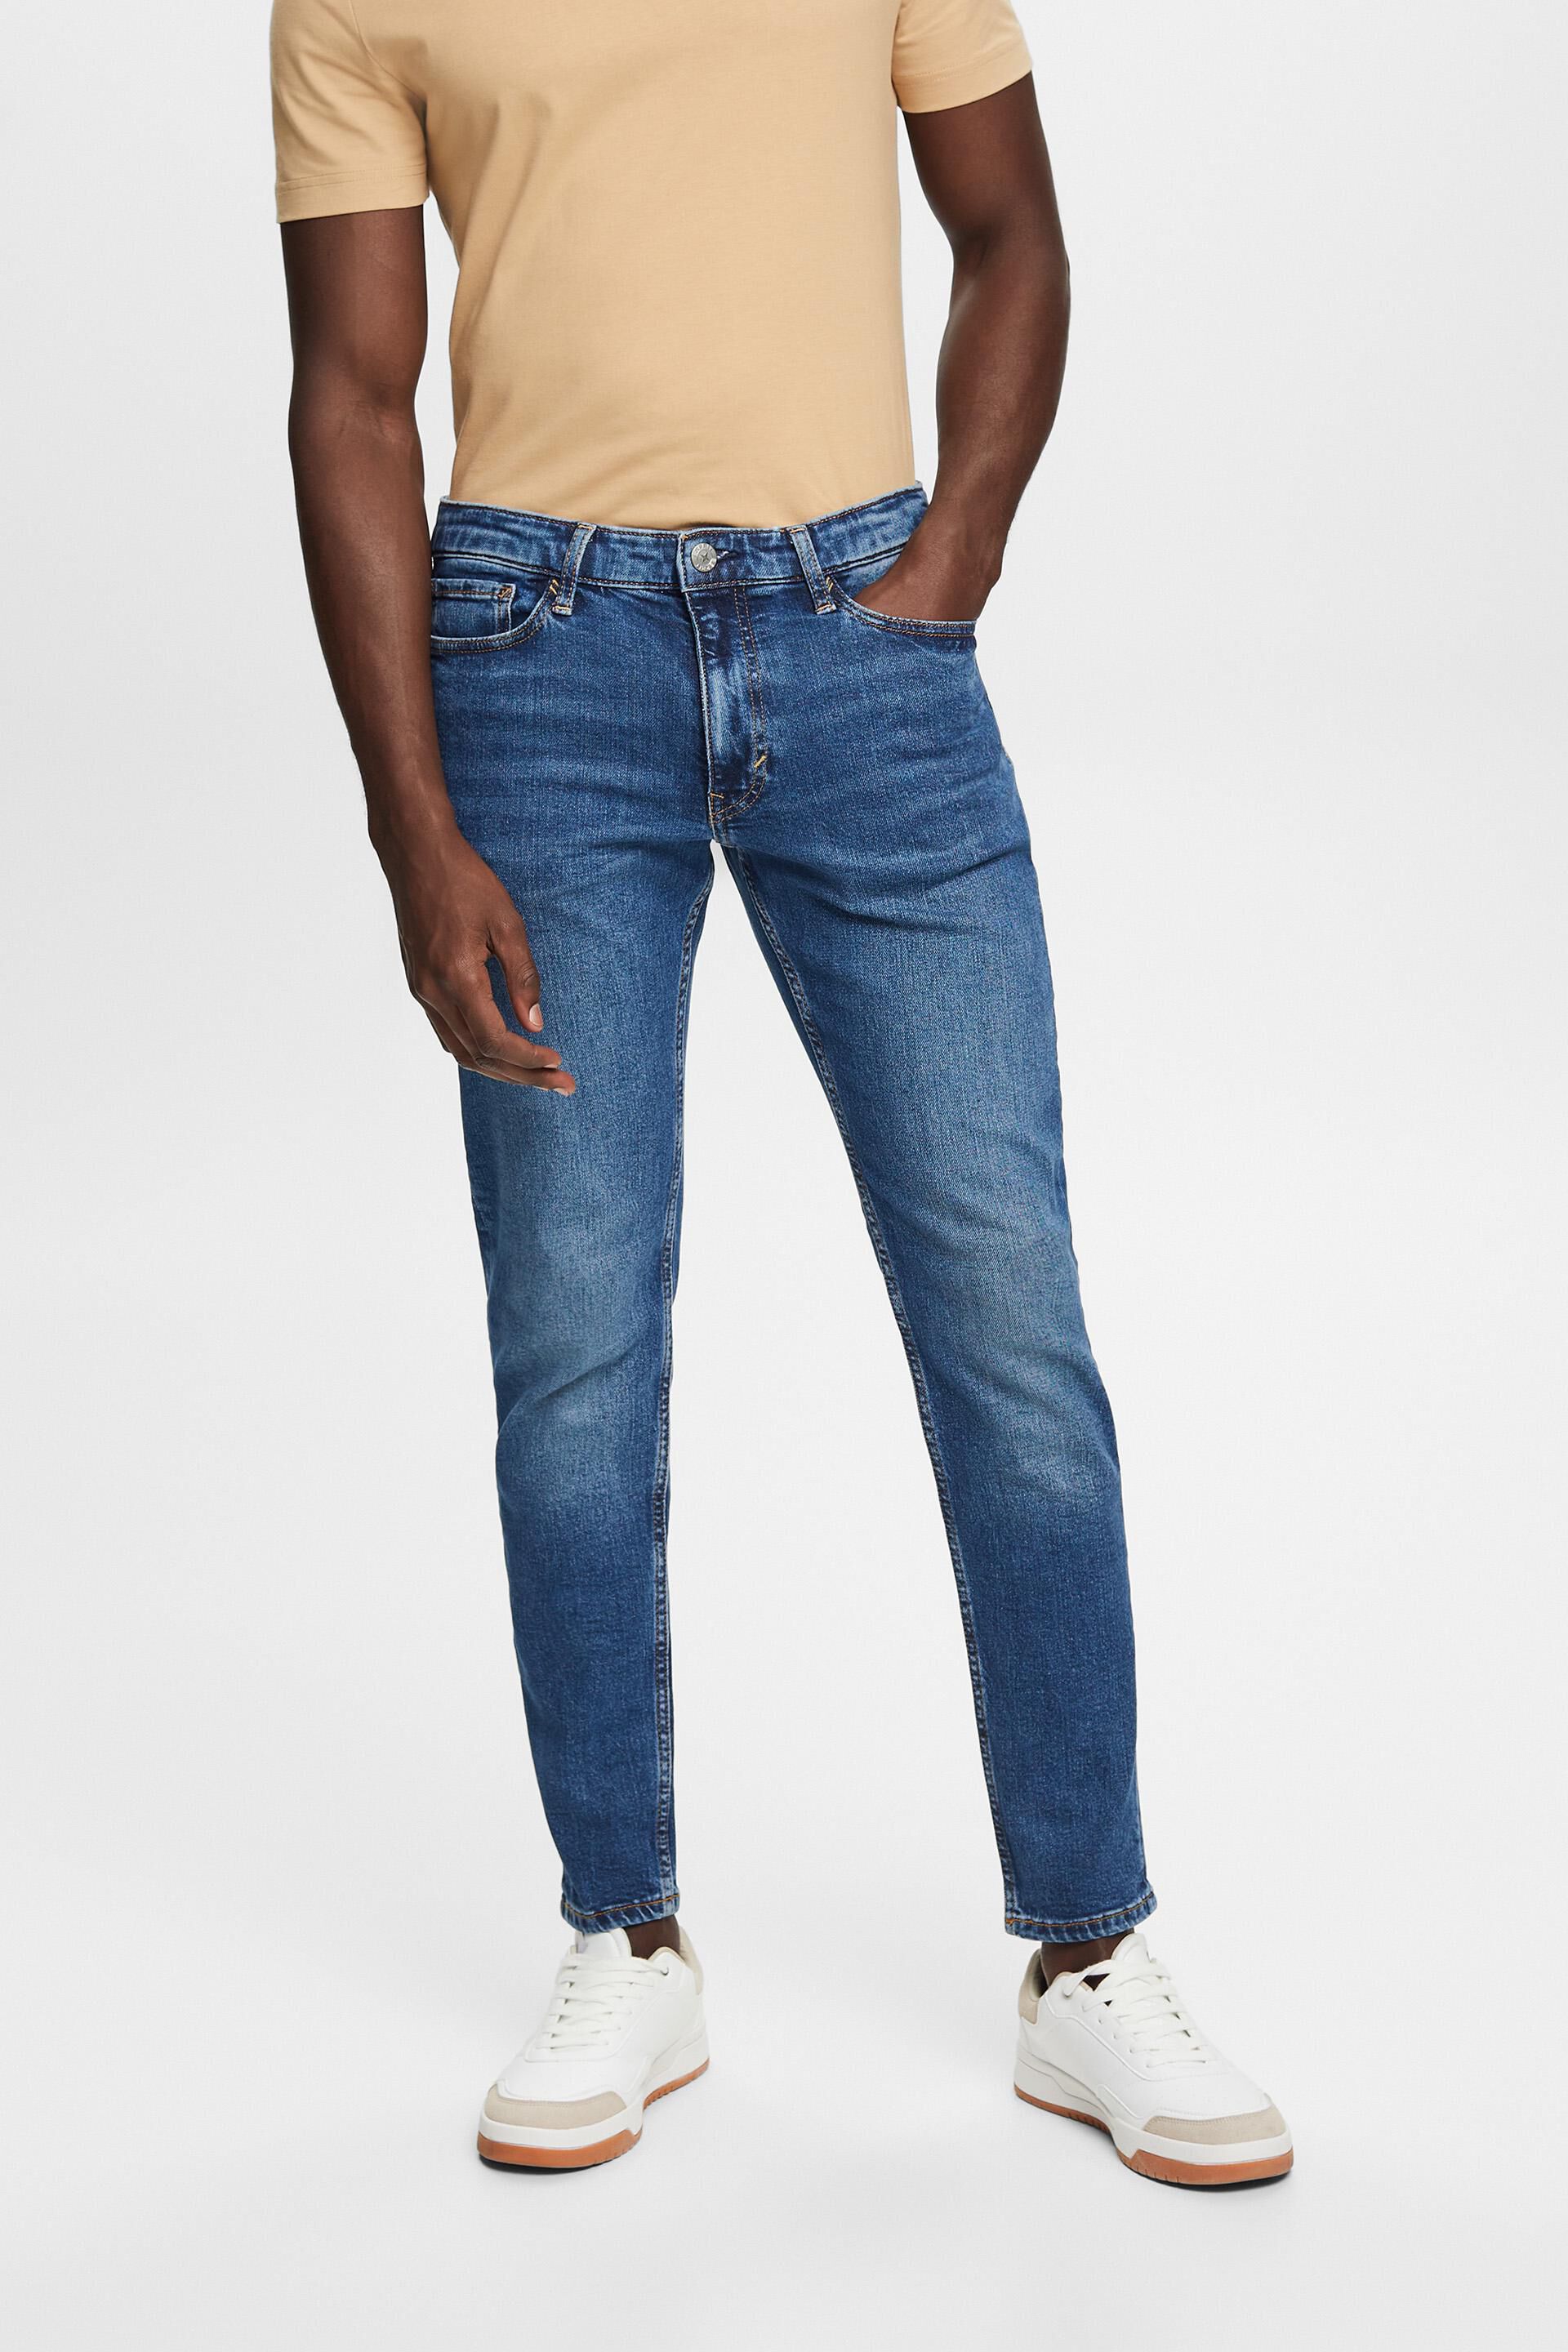 Esprit jeans recycled Tapered with cotton